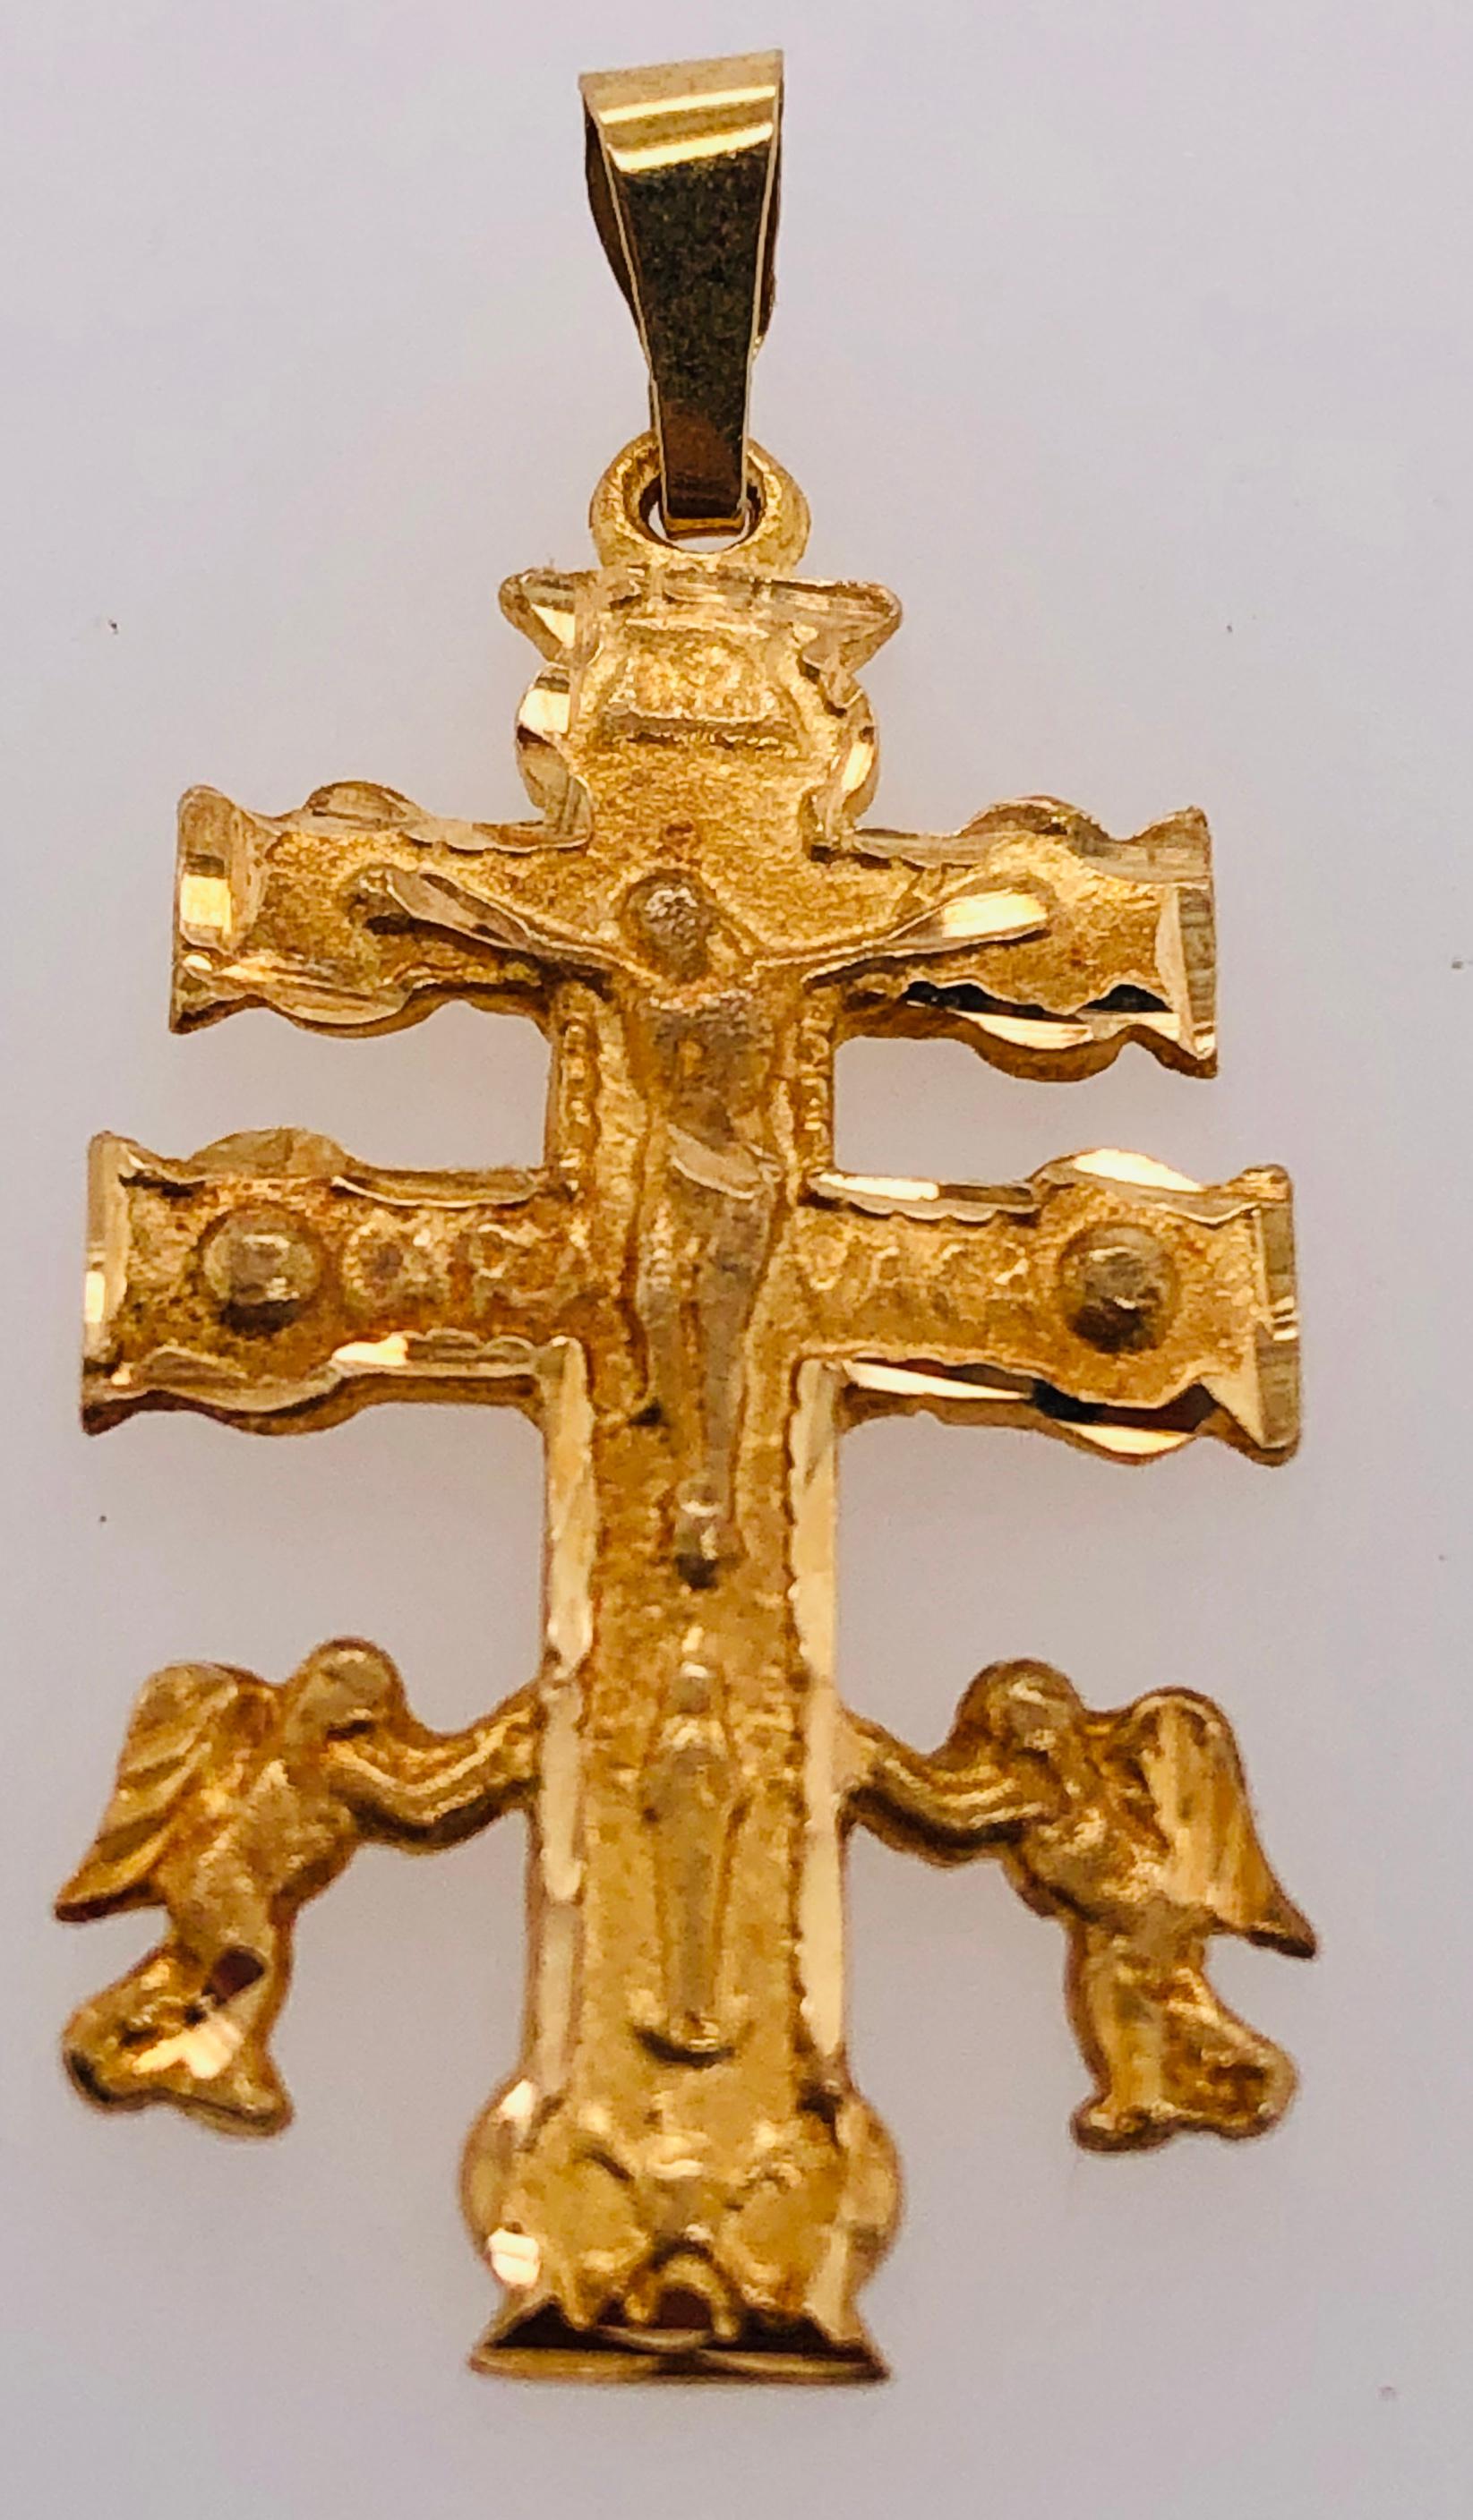 14 Karat Yellow Gold Cross / Religious Pendant
2.00 grams Total weight
25.75MM by 14.90MM. 